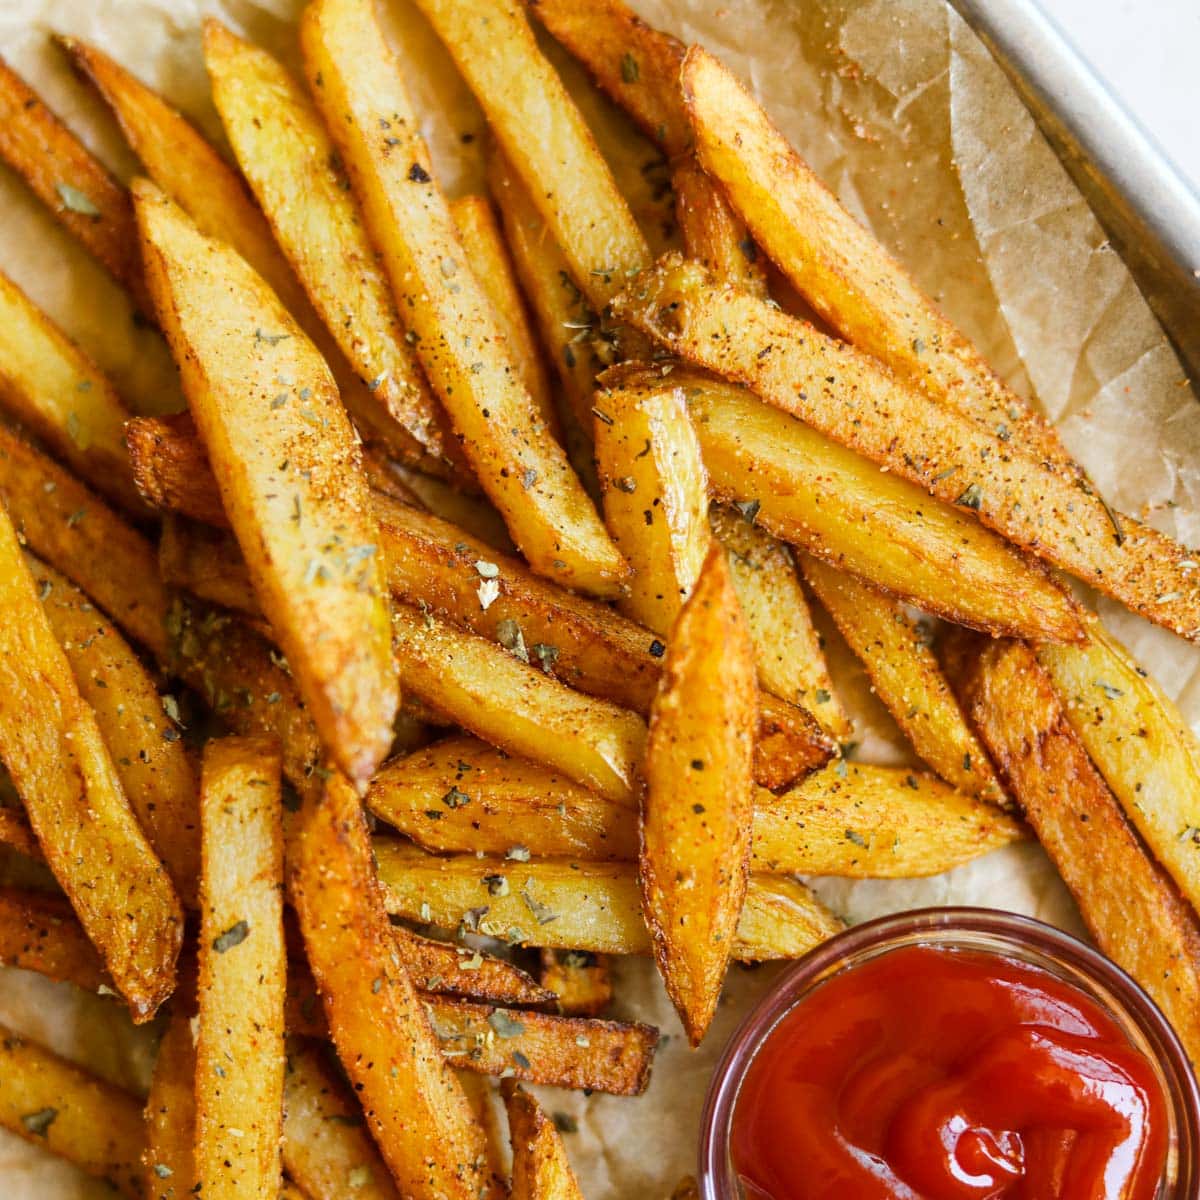 https://theheirloompantry.co/wp-content/uploads/2022/06/classic-seasoned-french-fries-the-heirloom-pantry-1-1.jpg